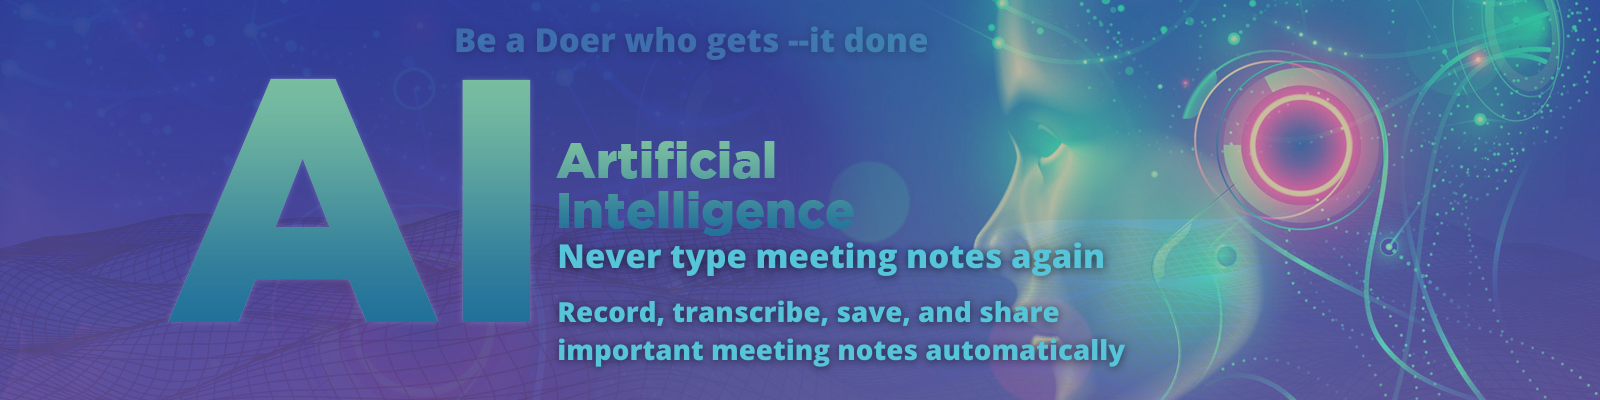 Artificial Intelligence Banner Text says Never type meeting notes again  Record, transcribe, save, and share meeting notes automatically. Image shows a human like robot head looking out into a technological abyss 